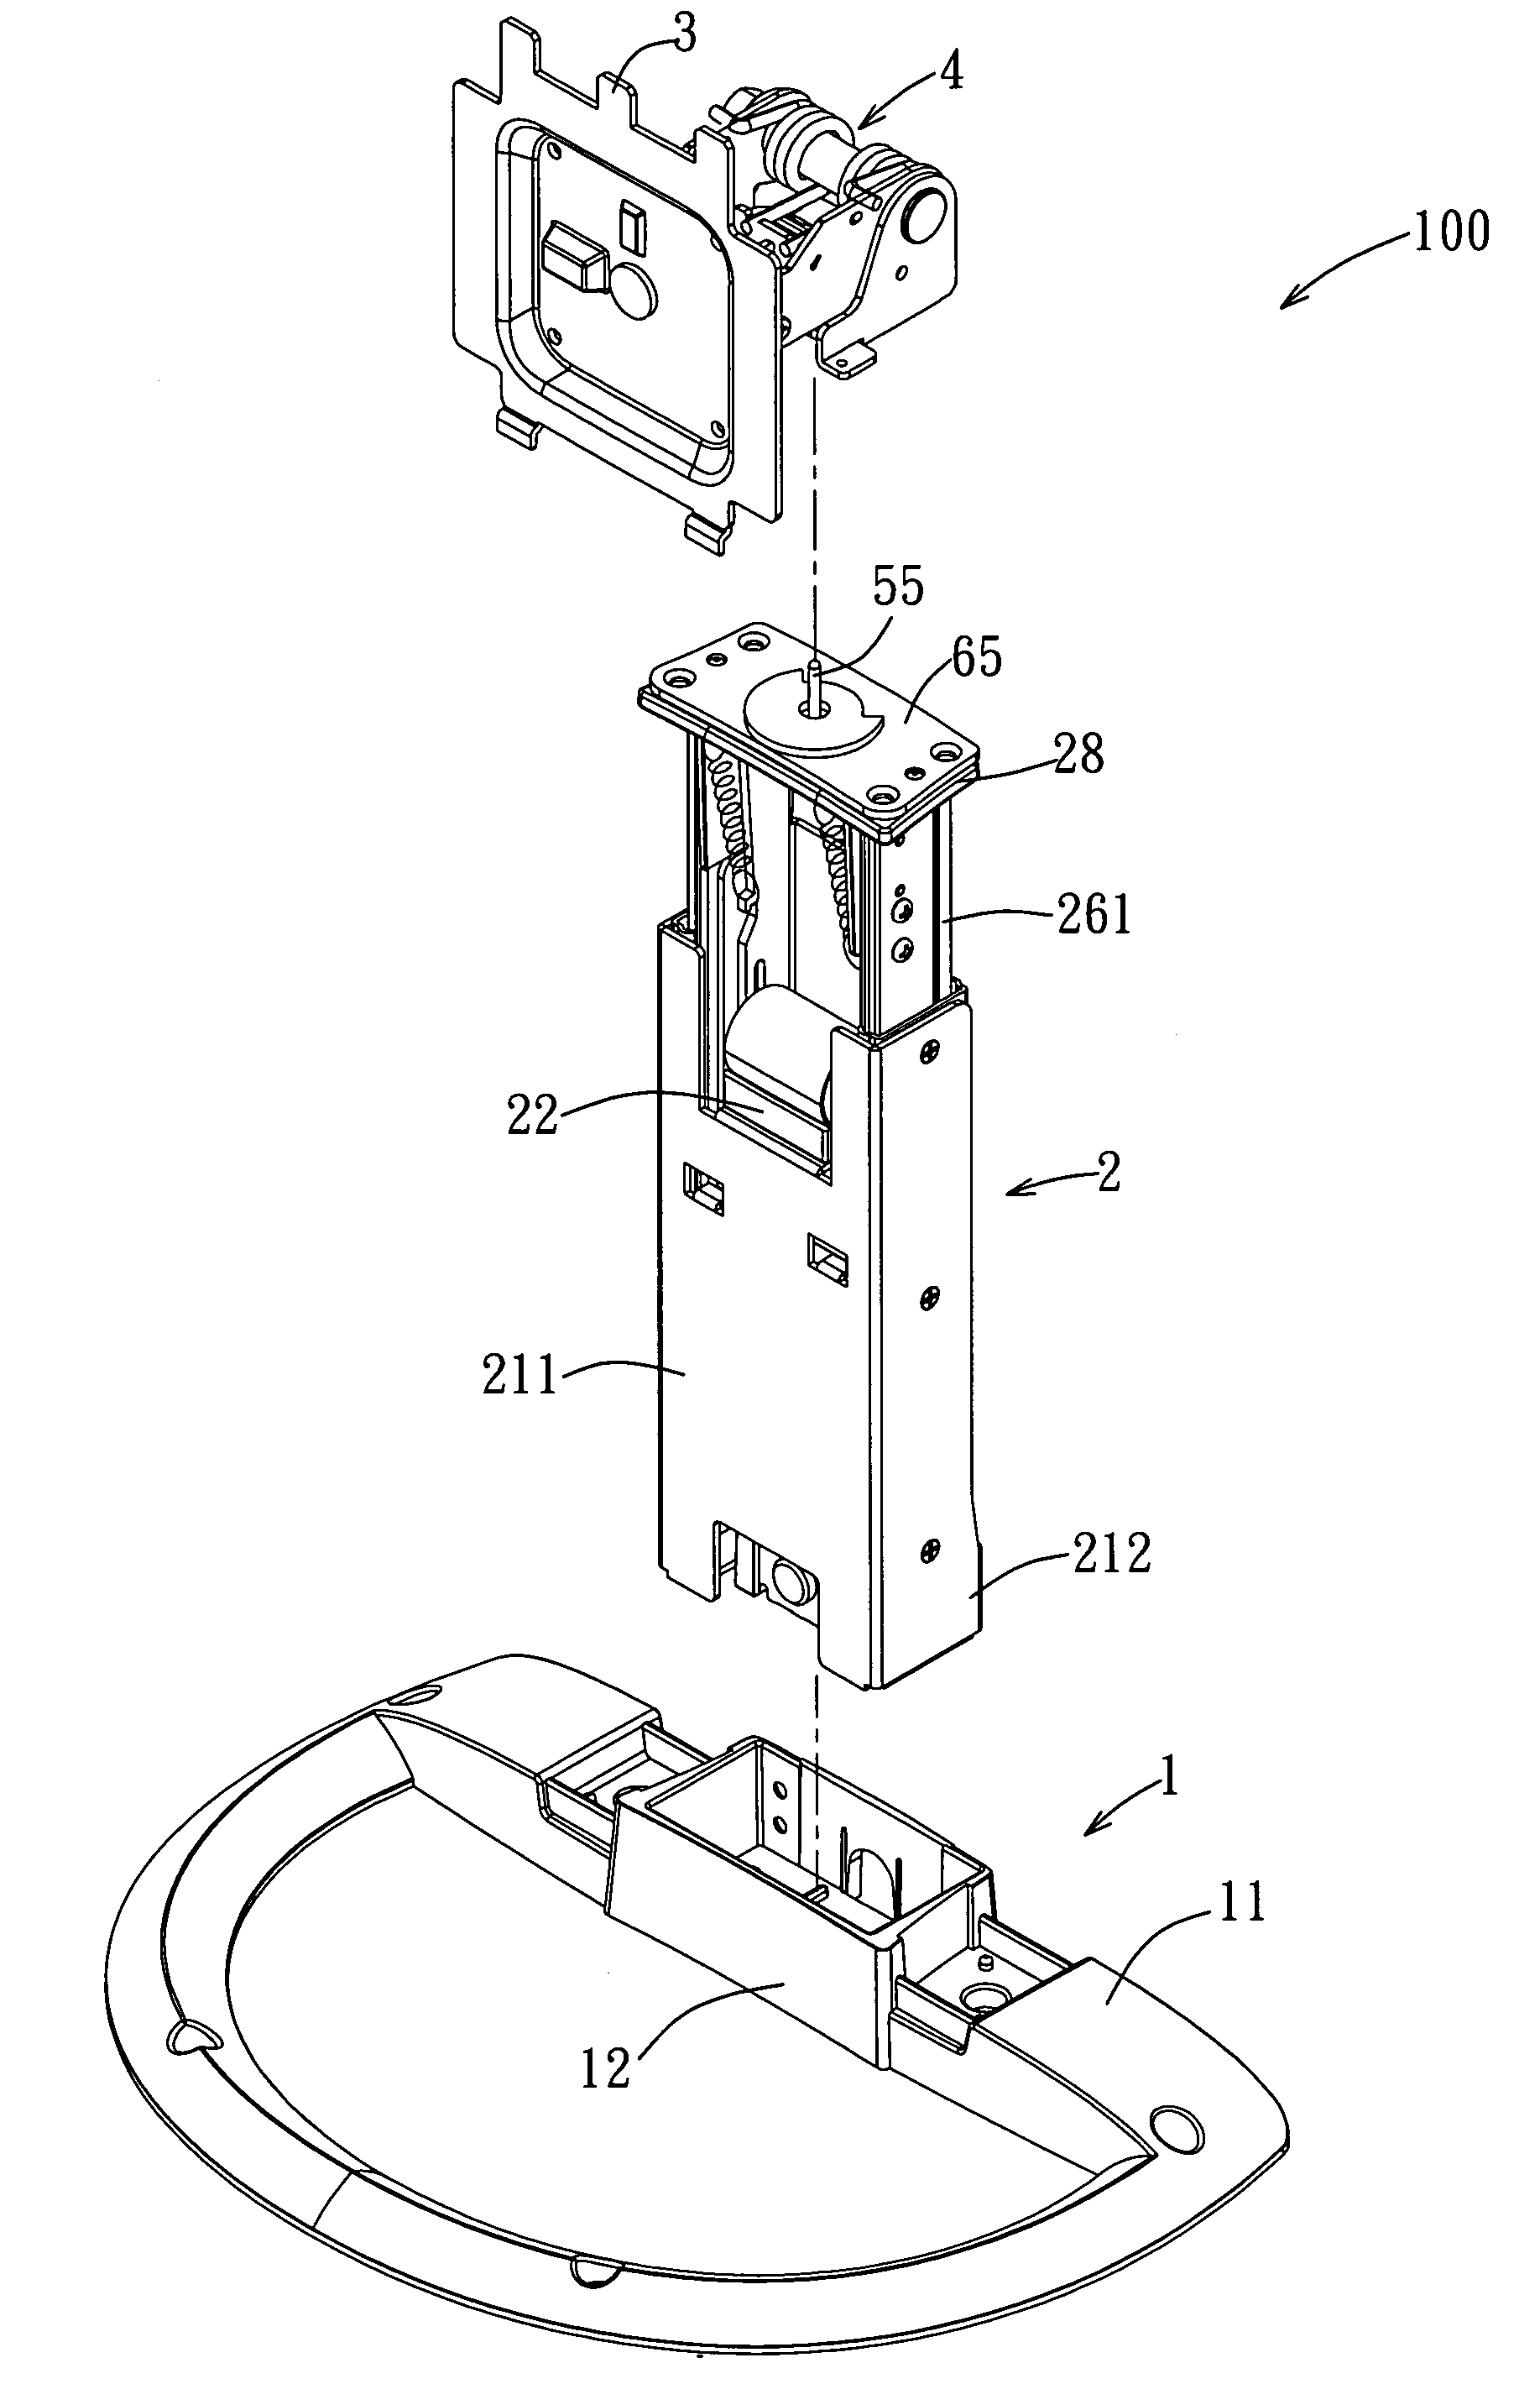 Height-adjustable support for a display device